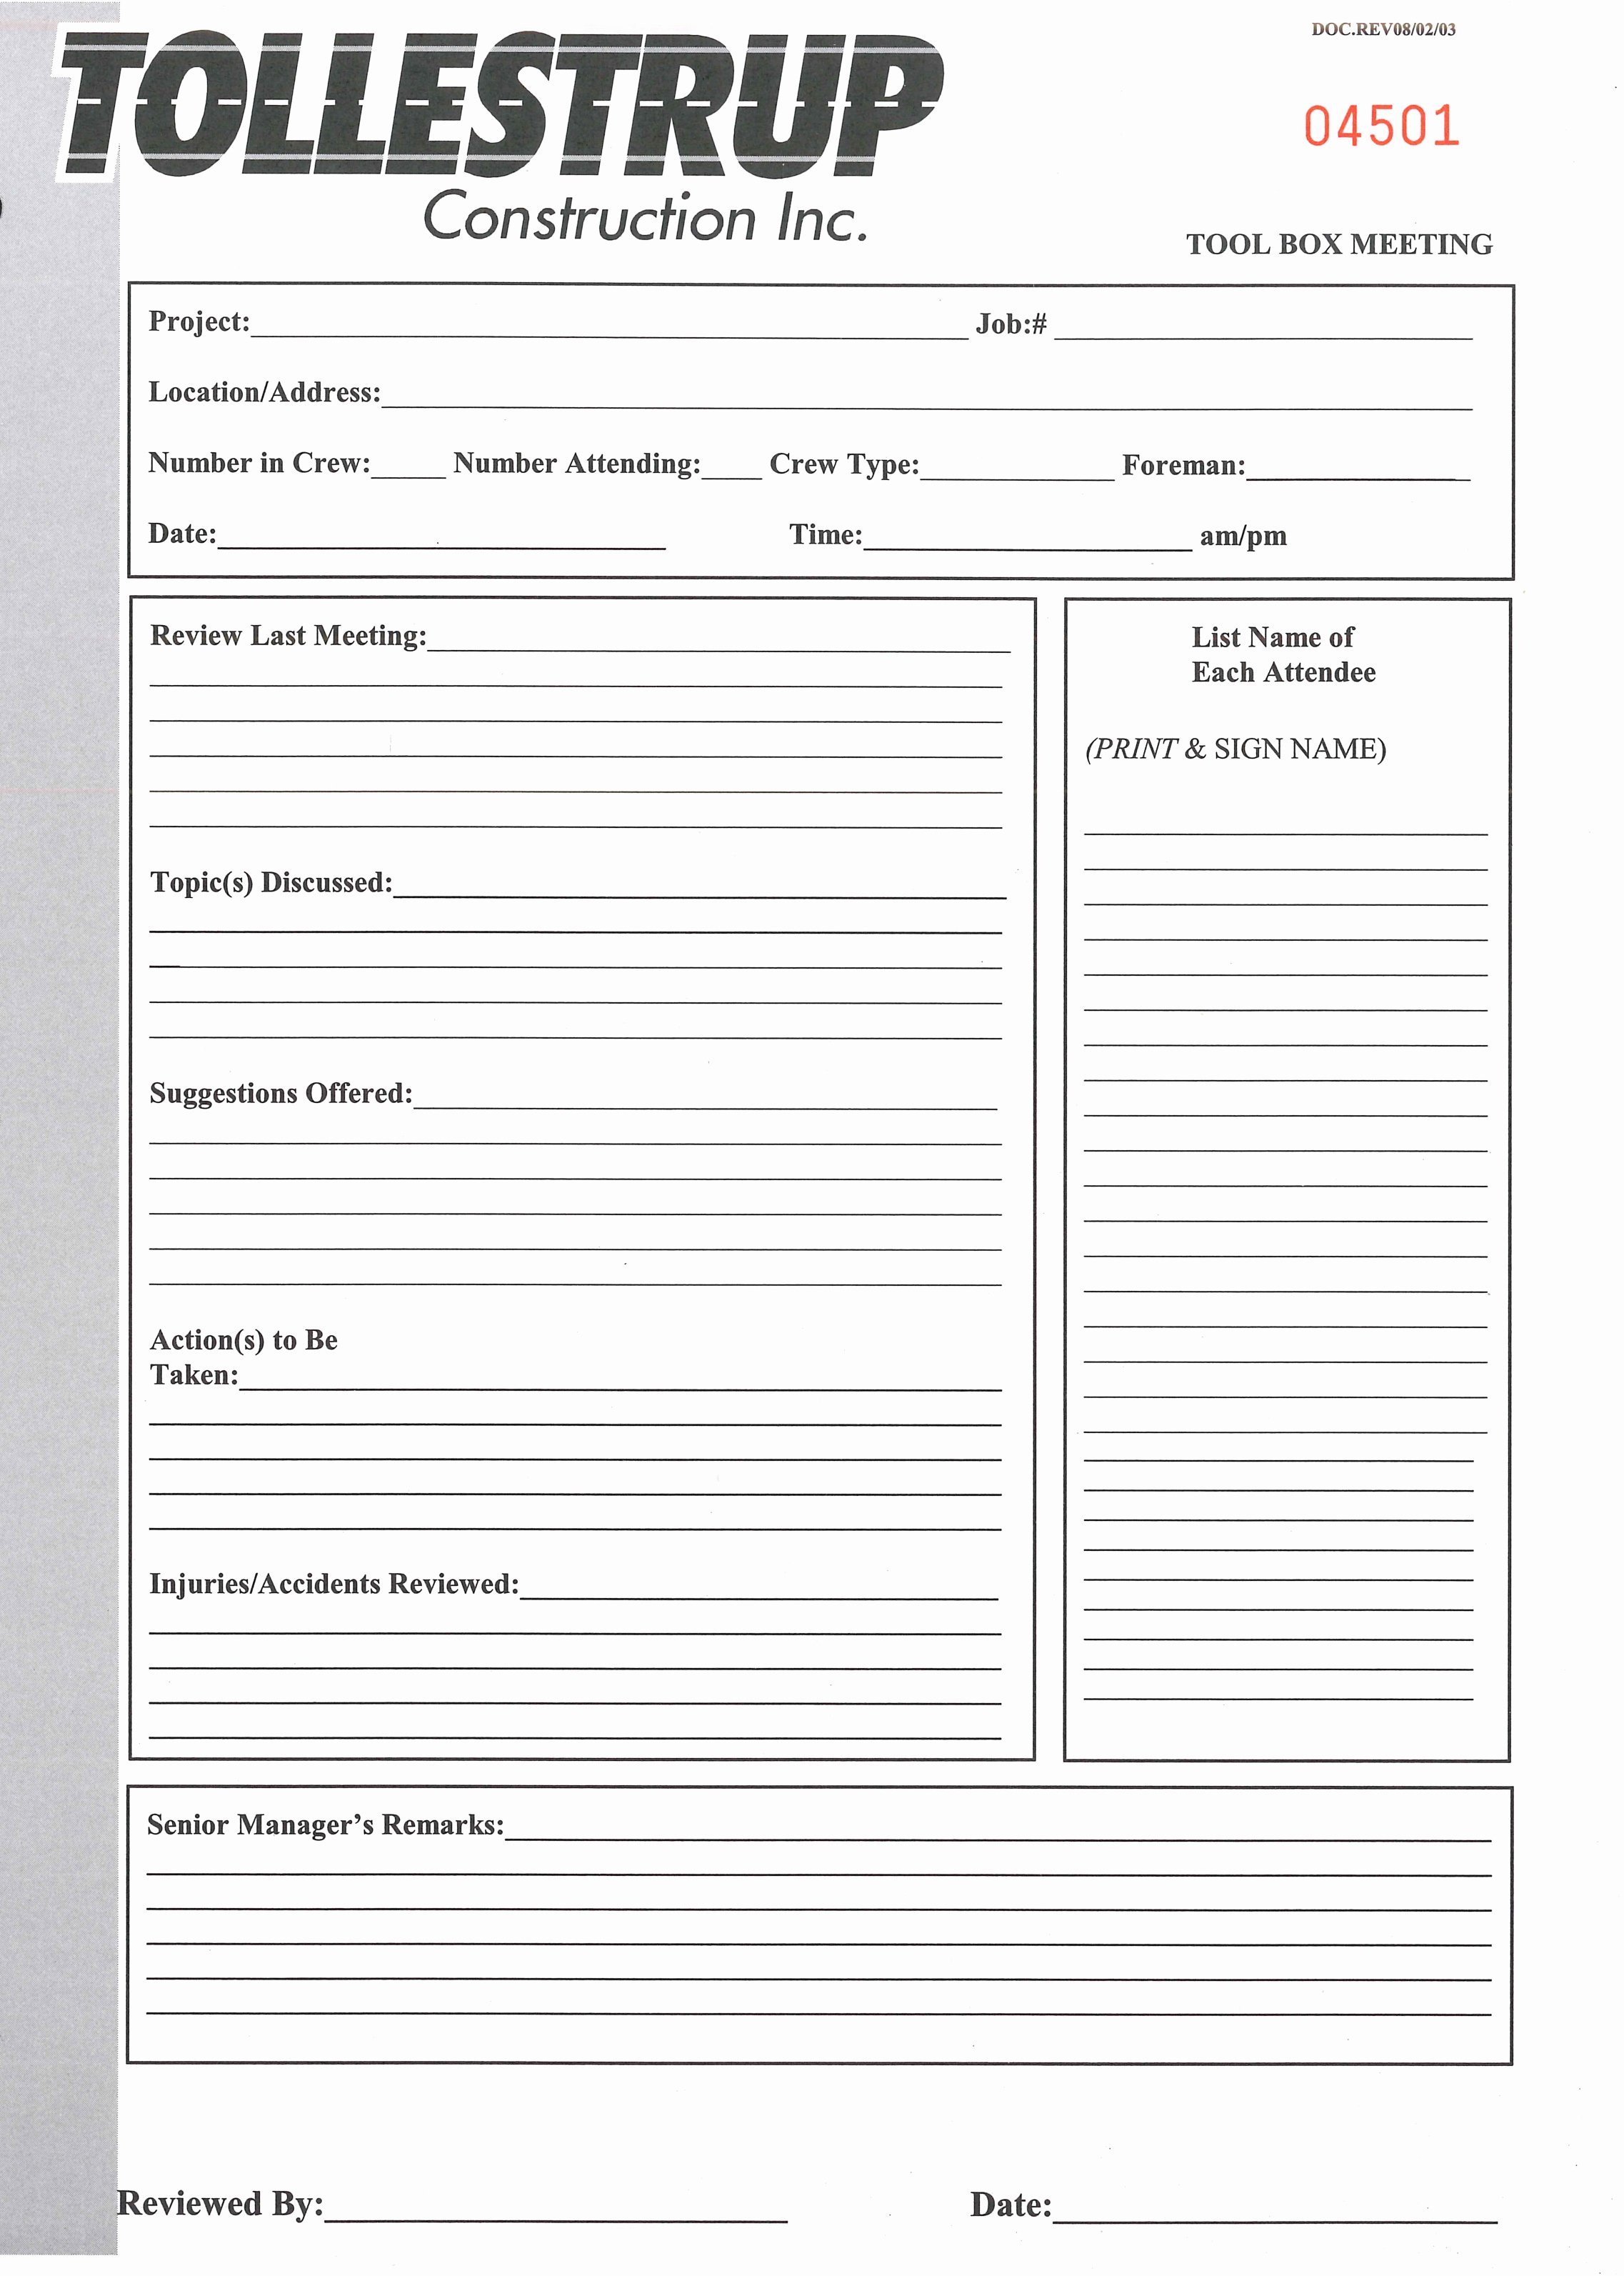 Construction Safety Manual Template Awesome 24 Of Safety toolbox Meeting form Template